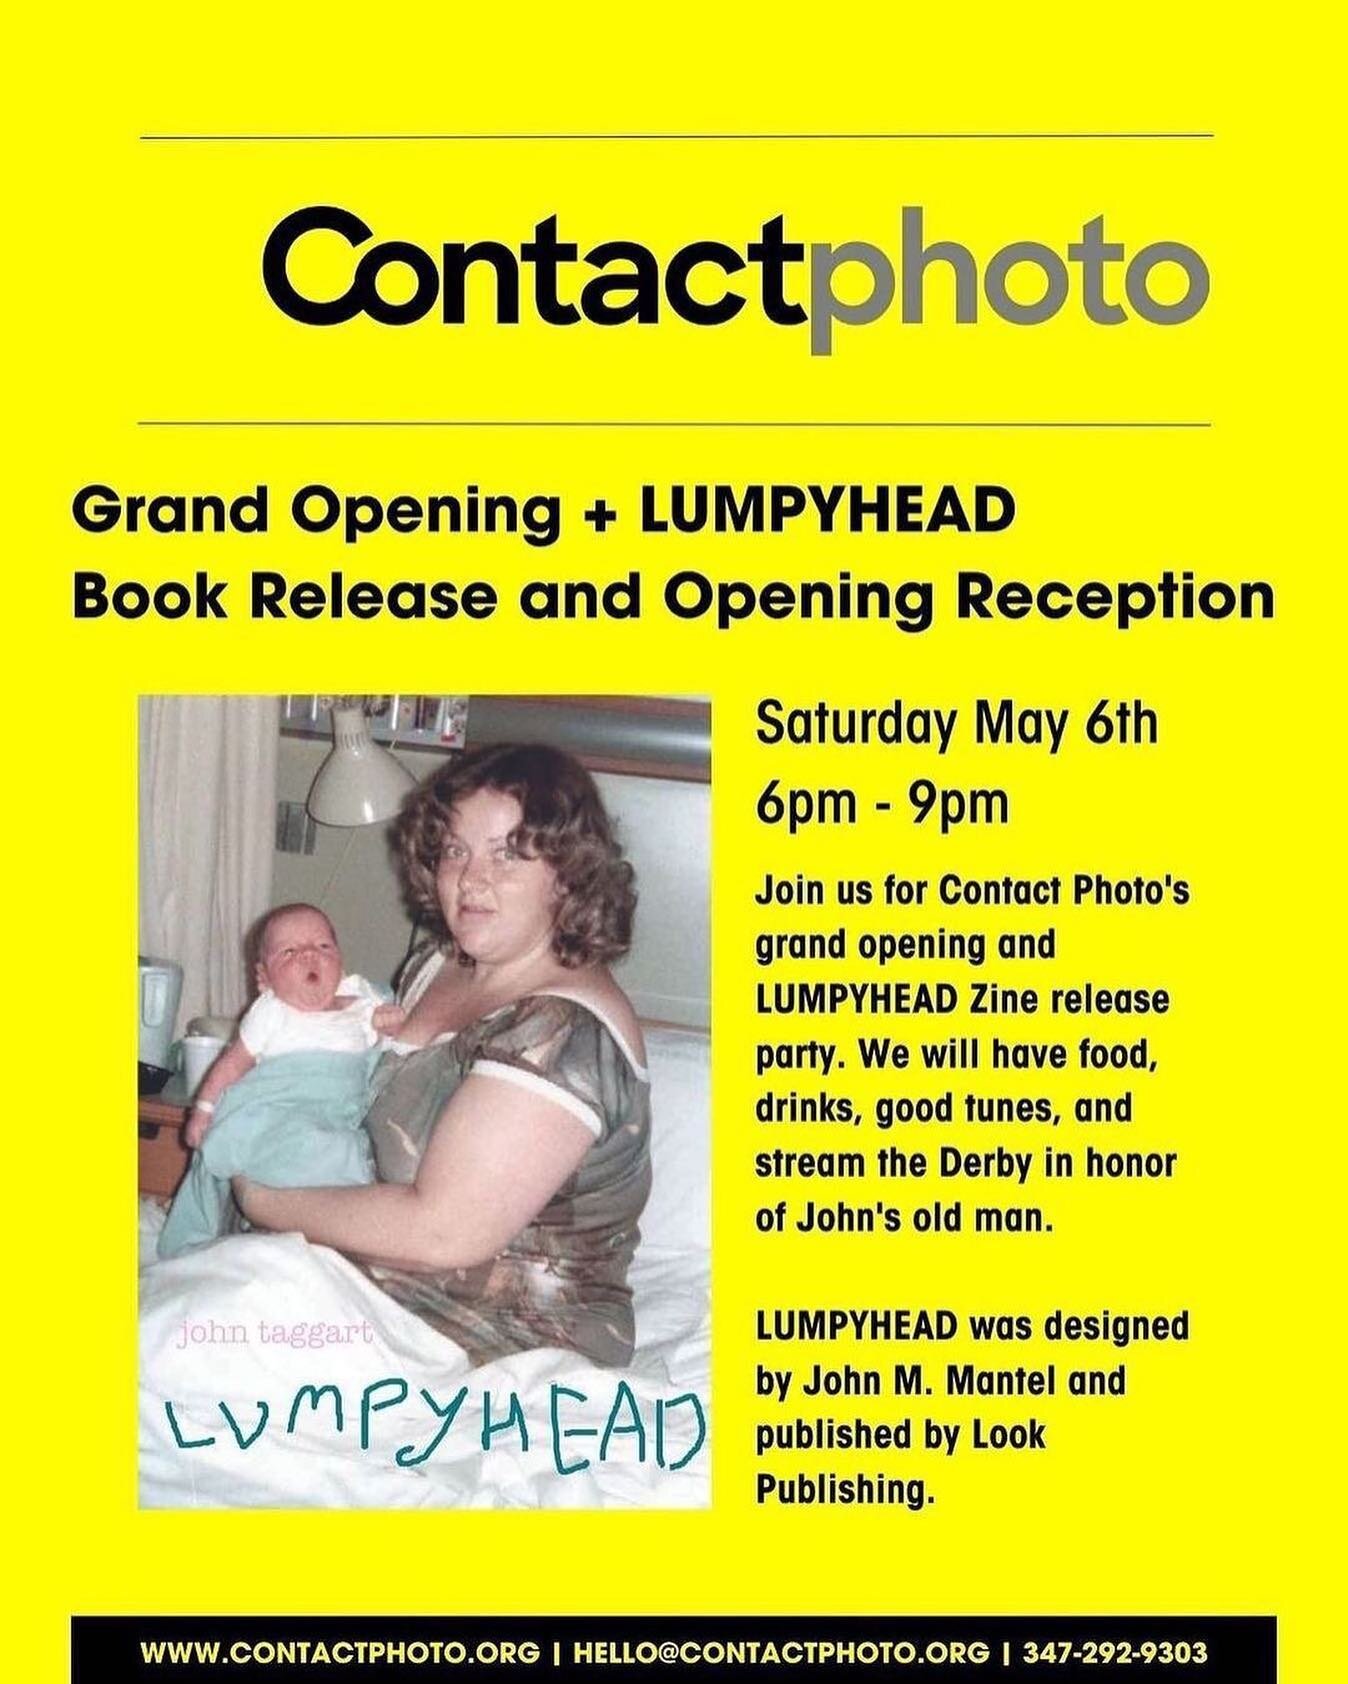 Posted @withregram &bull; nycspc Join us tomorrow for Contact Photo's Grand Opening and LUMPYHEAD Zine release party. We will have food, drinks, good tunes, and will stream the Derby in honor of John's old man.⁣⁣
⁣⁣
About the zine:⁣⁣
First published 